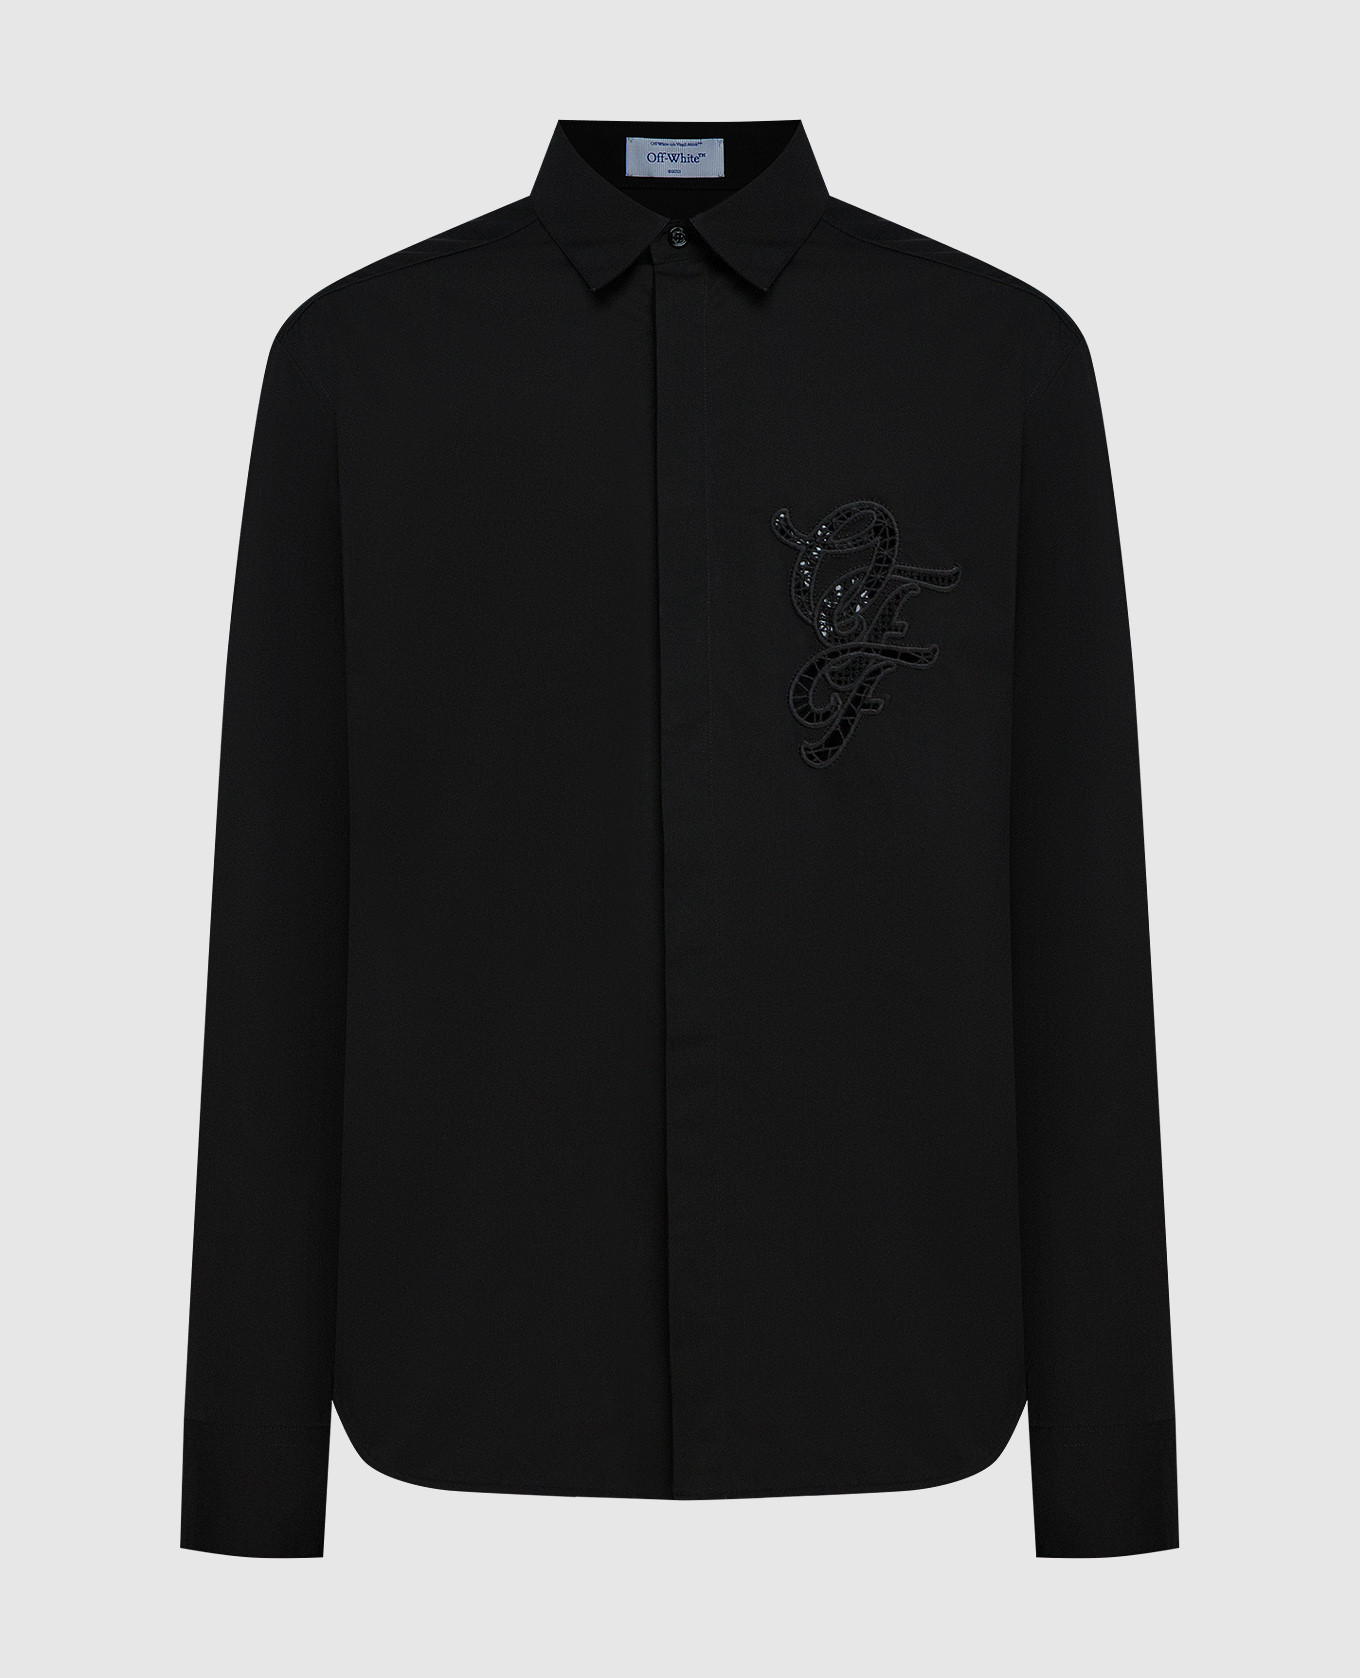 Black shirt with openwork logo embroidery